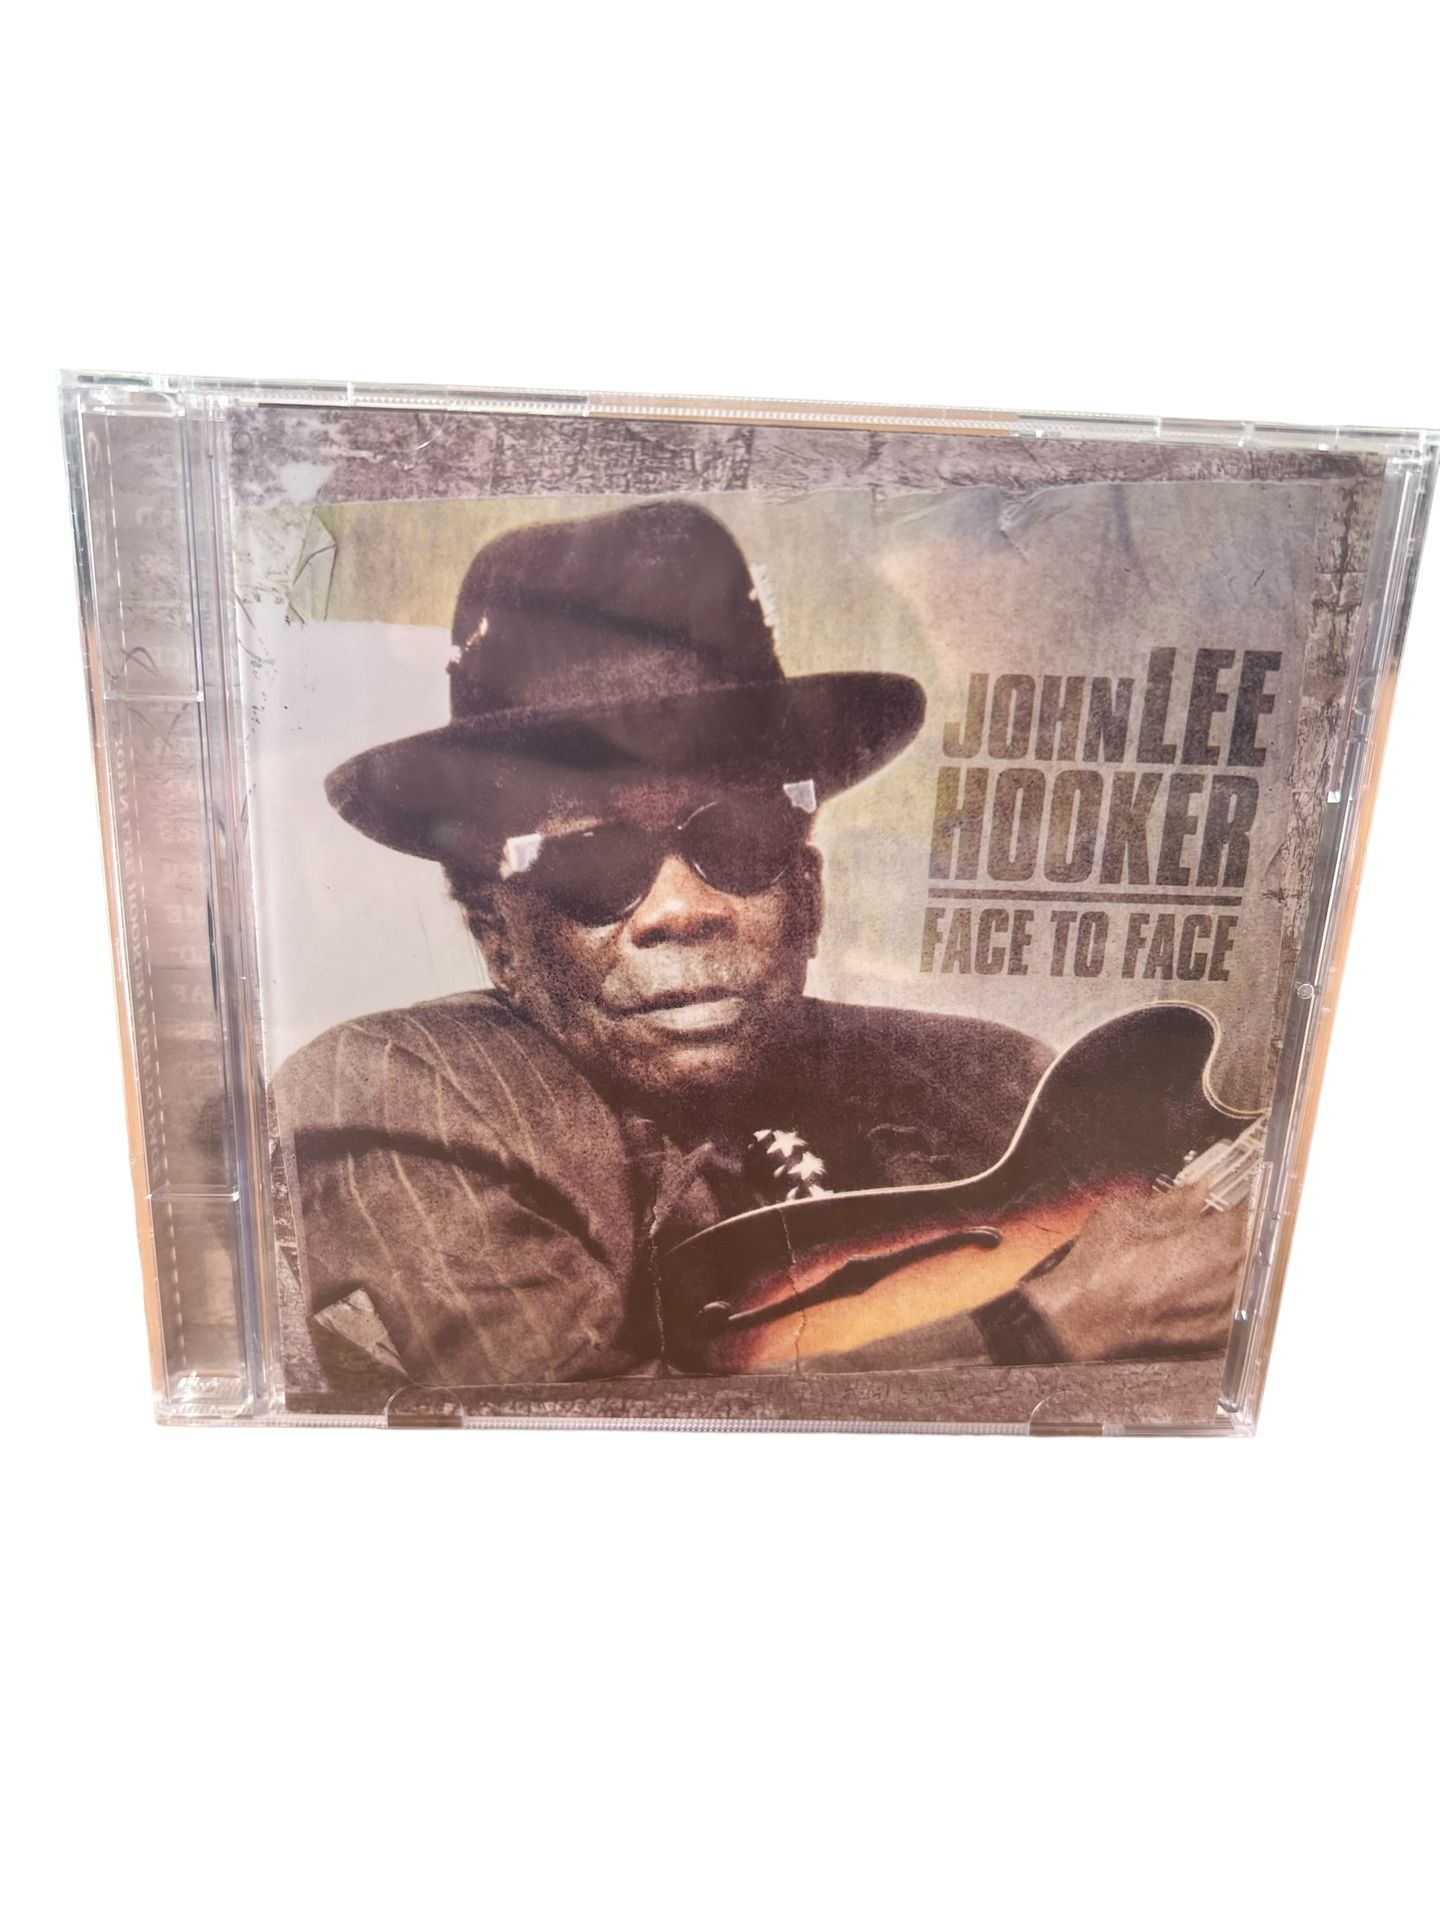   The Final Recordings, Vol. 1: Face to Face by John Lee Hooker (CD, Oct-2003  This CD features the final recordings of legendary Delta blues artist, 